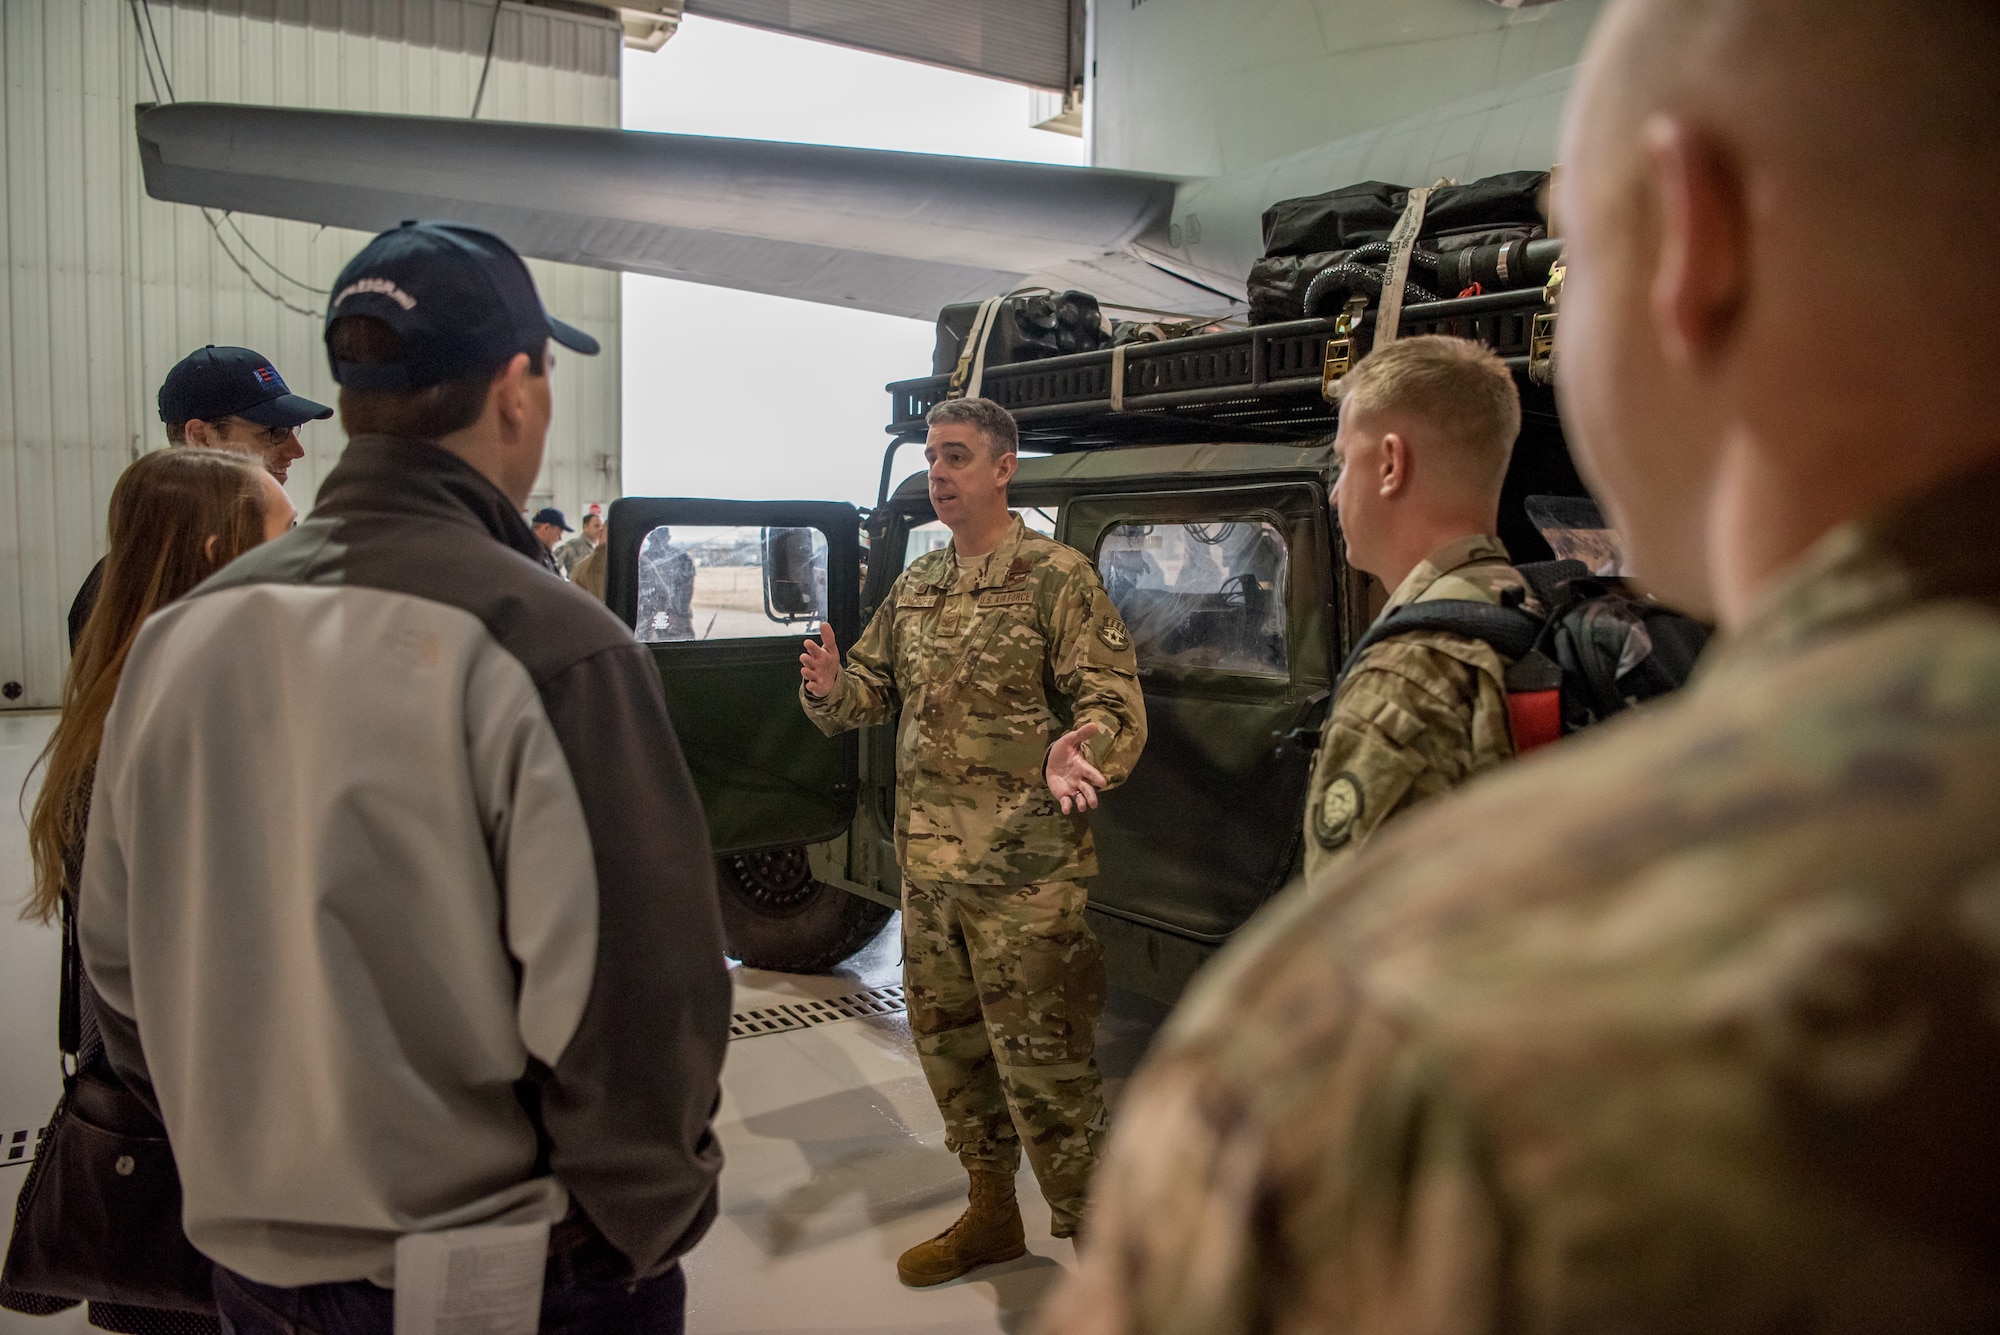 Col. Bruce Bancroft, commander of the 123rd Contingency Response Group, briefs civilian employers at the Kentucky Air National Guard Base in Louisville, Ky., March 15, 2019, as part of an Employer Support of the Guard and Reserve “Bosslift.” The program enhances awareness and understanding between National Guardsmen and the civilian employers for whom they work when they’re not on duty. (U.S. Air National Guard photo by Staff Sgt. Joshua Horton)